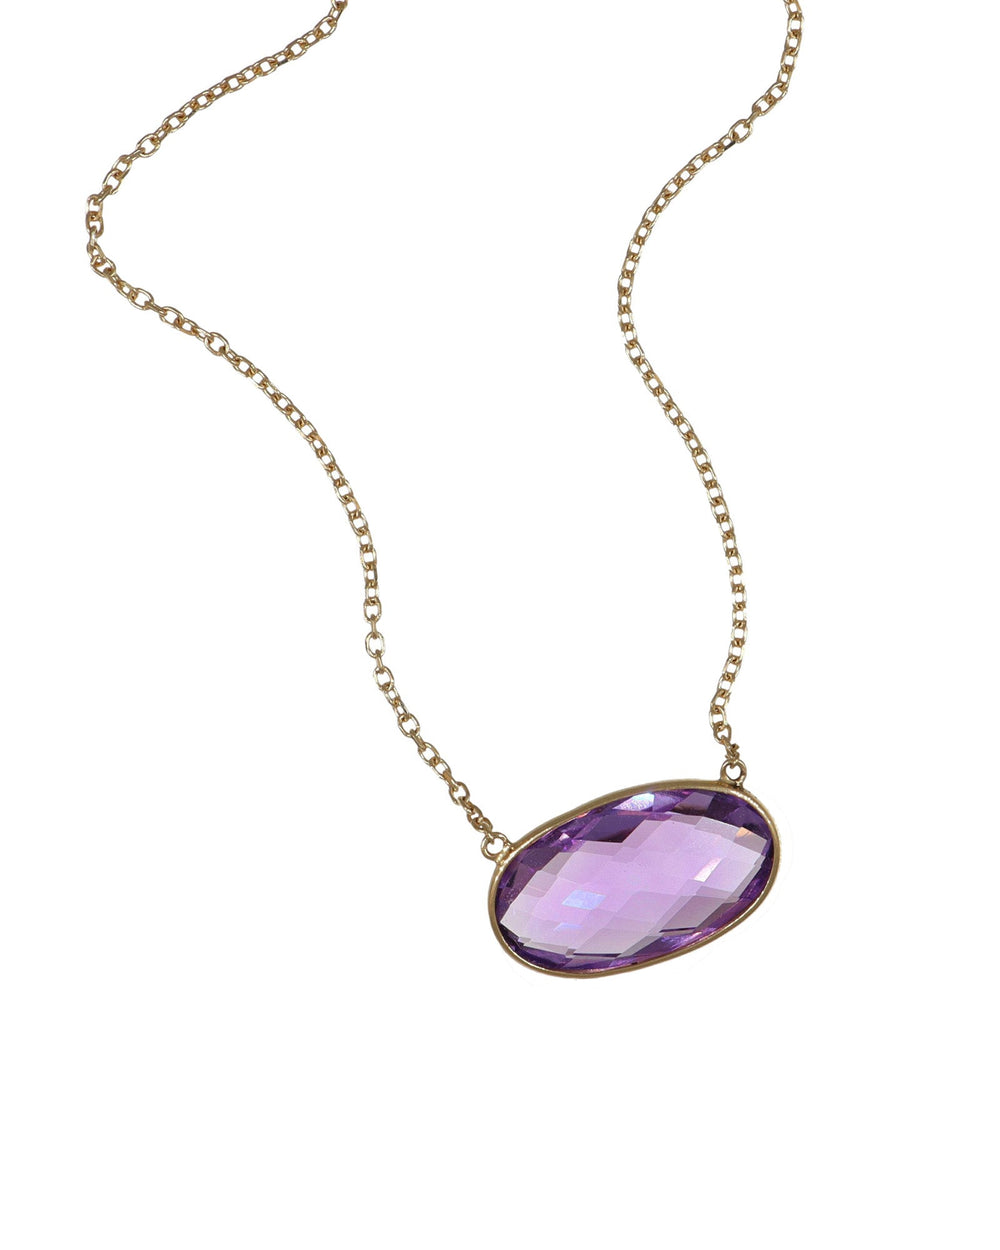 Faceted Oval Amethyst Necklace